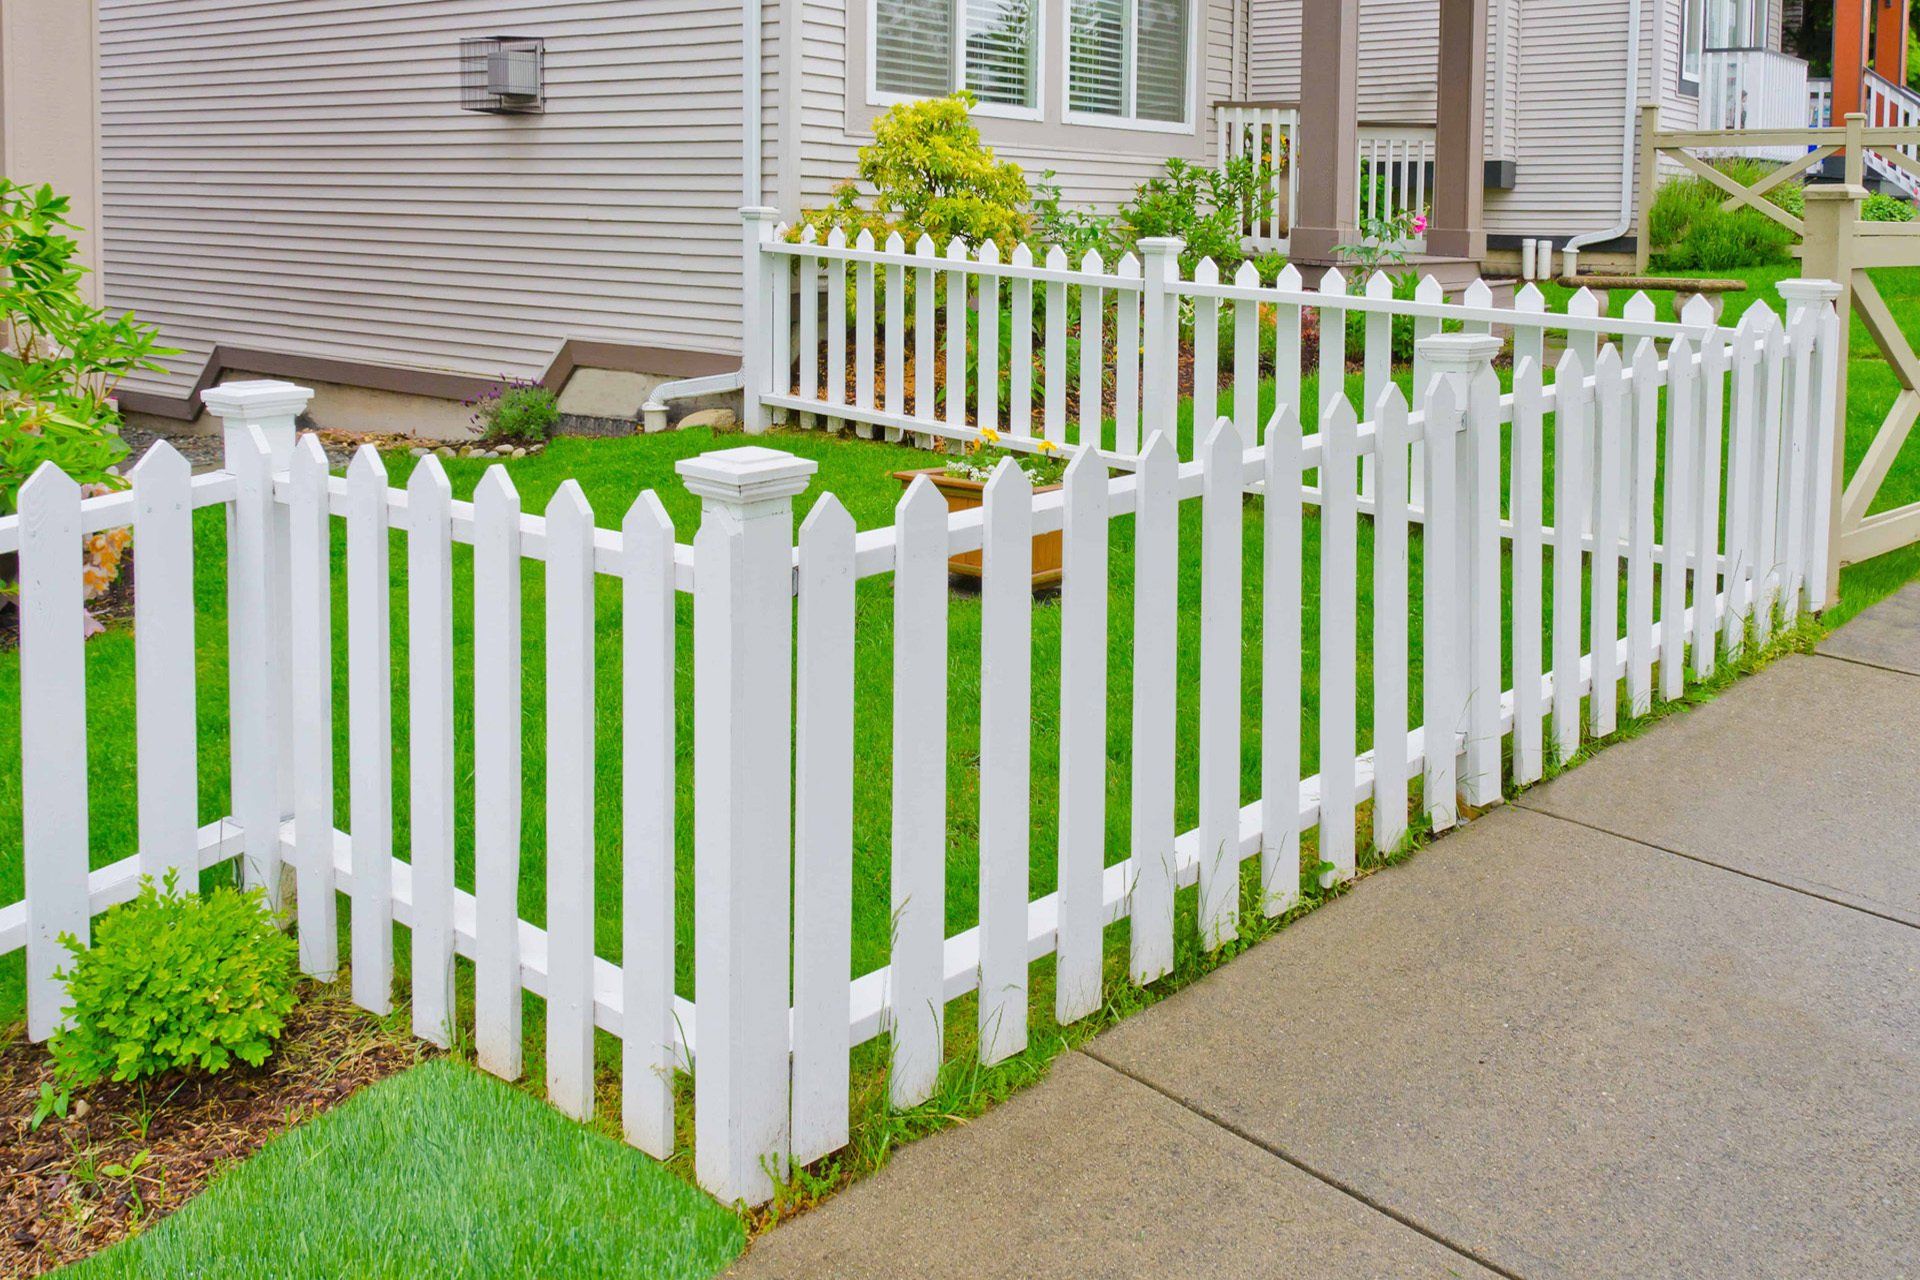 Vinyl fence is a low maintenance fencing